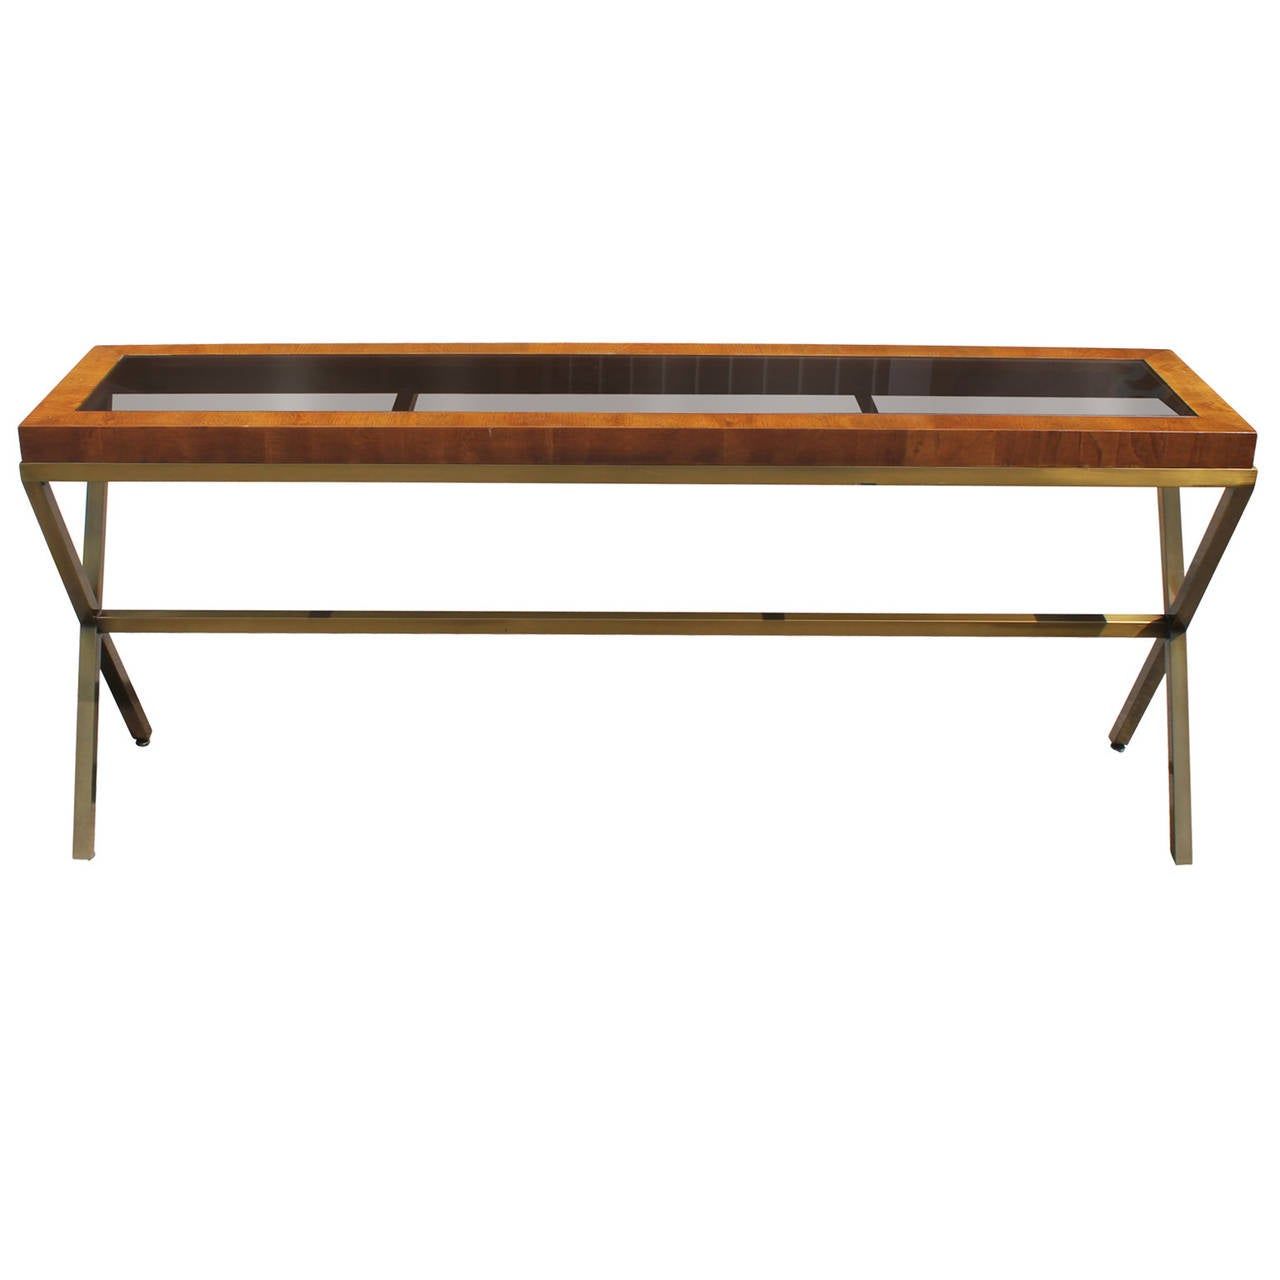 Stunning Brass, Smoked Glass, And Burl Wood Console At 1stdibs With Regard To Brass Smoked Glass Console Tables (Photo 1 of 20)